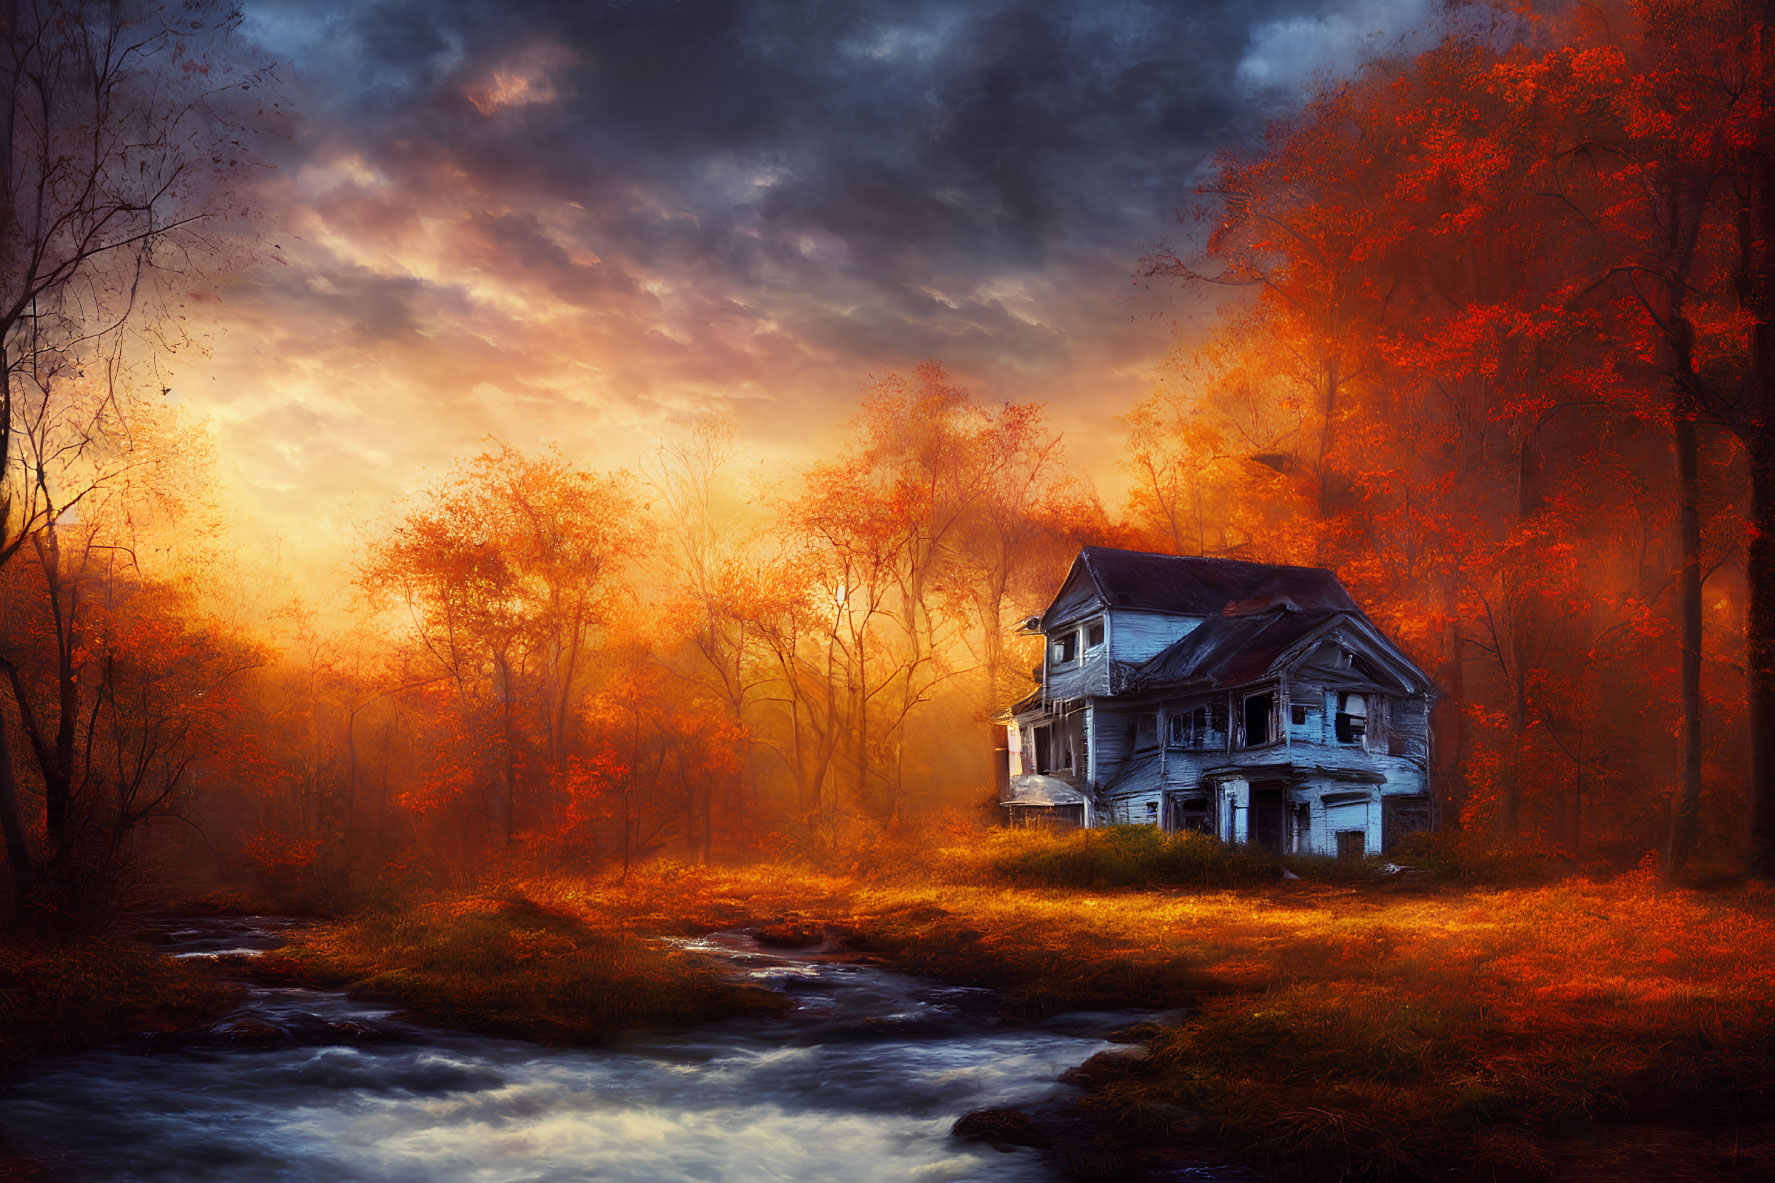 Weathered two-story house in fall foliage with stream and sunset sky